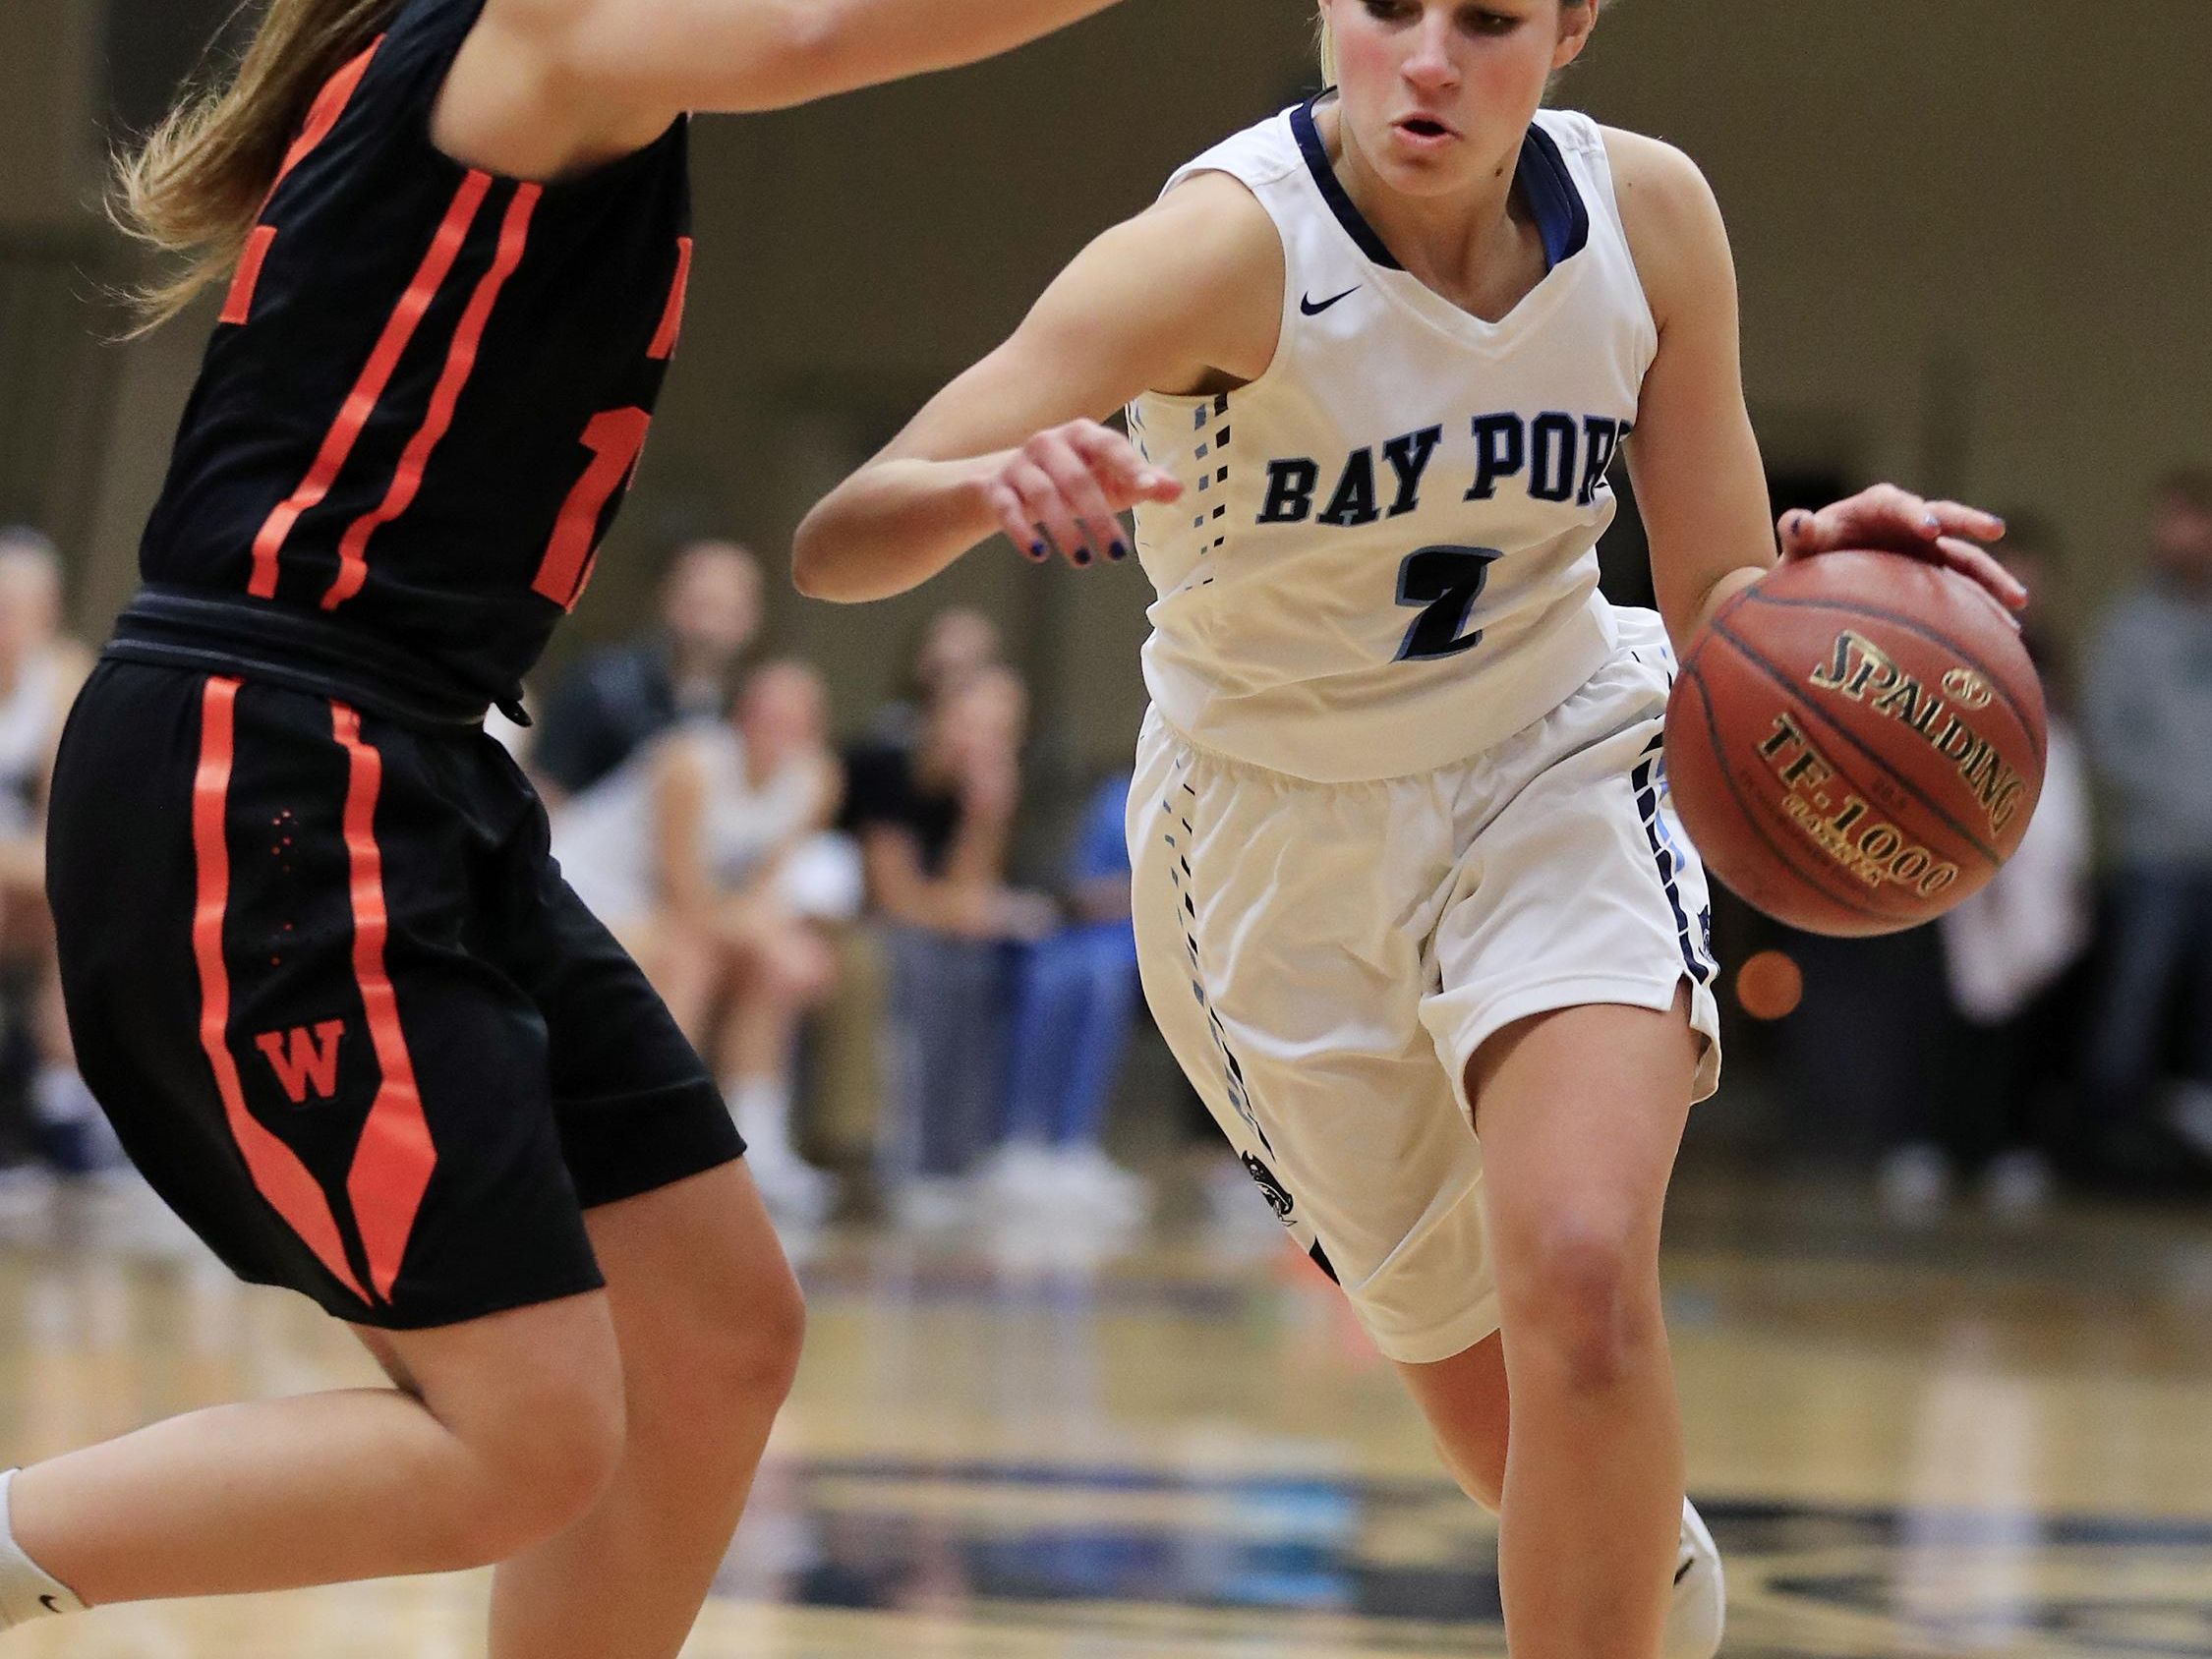 Bay Port's Grace Krause (2) drives against West De Pere's Liz Edinger (12) at Bay Port High School on Friday in a nonconference girls basketball. Bay Port is tied with De Pere atop the Fox River Classic Conference standings.